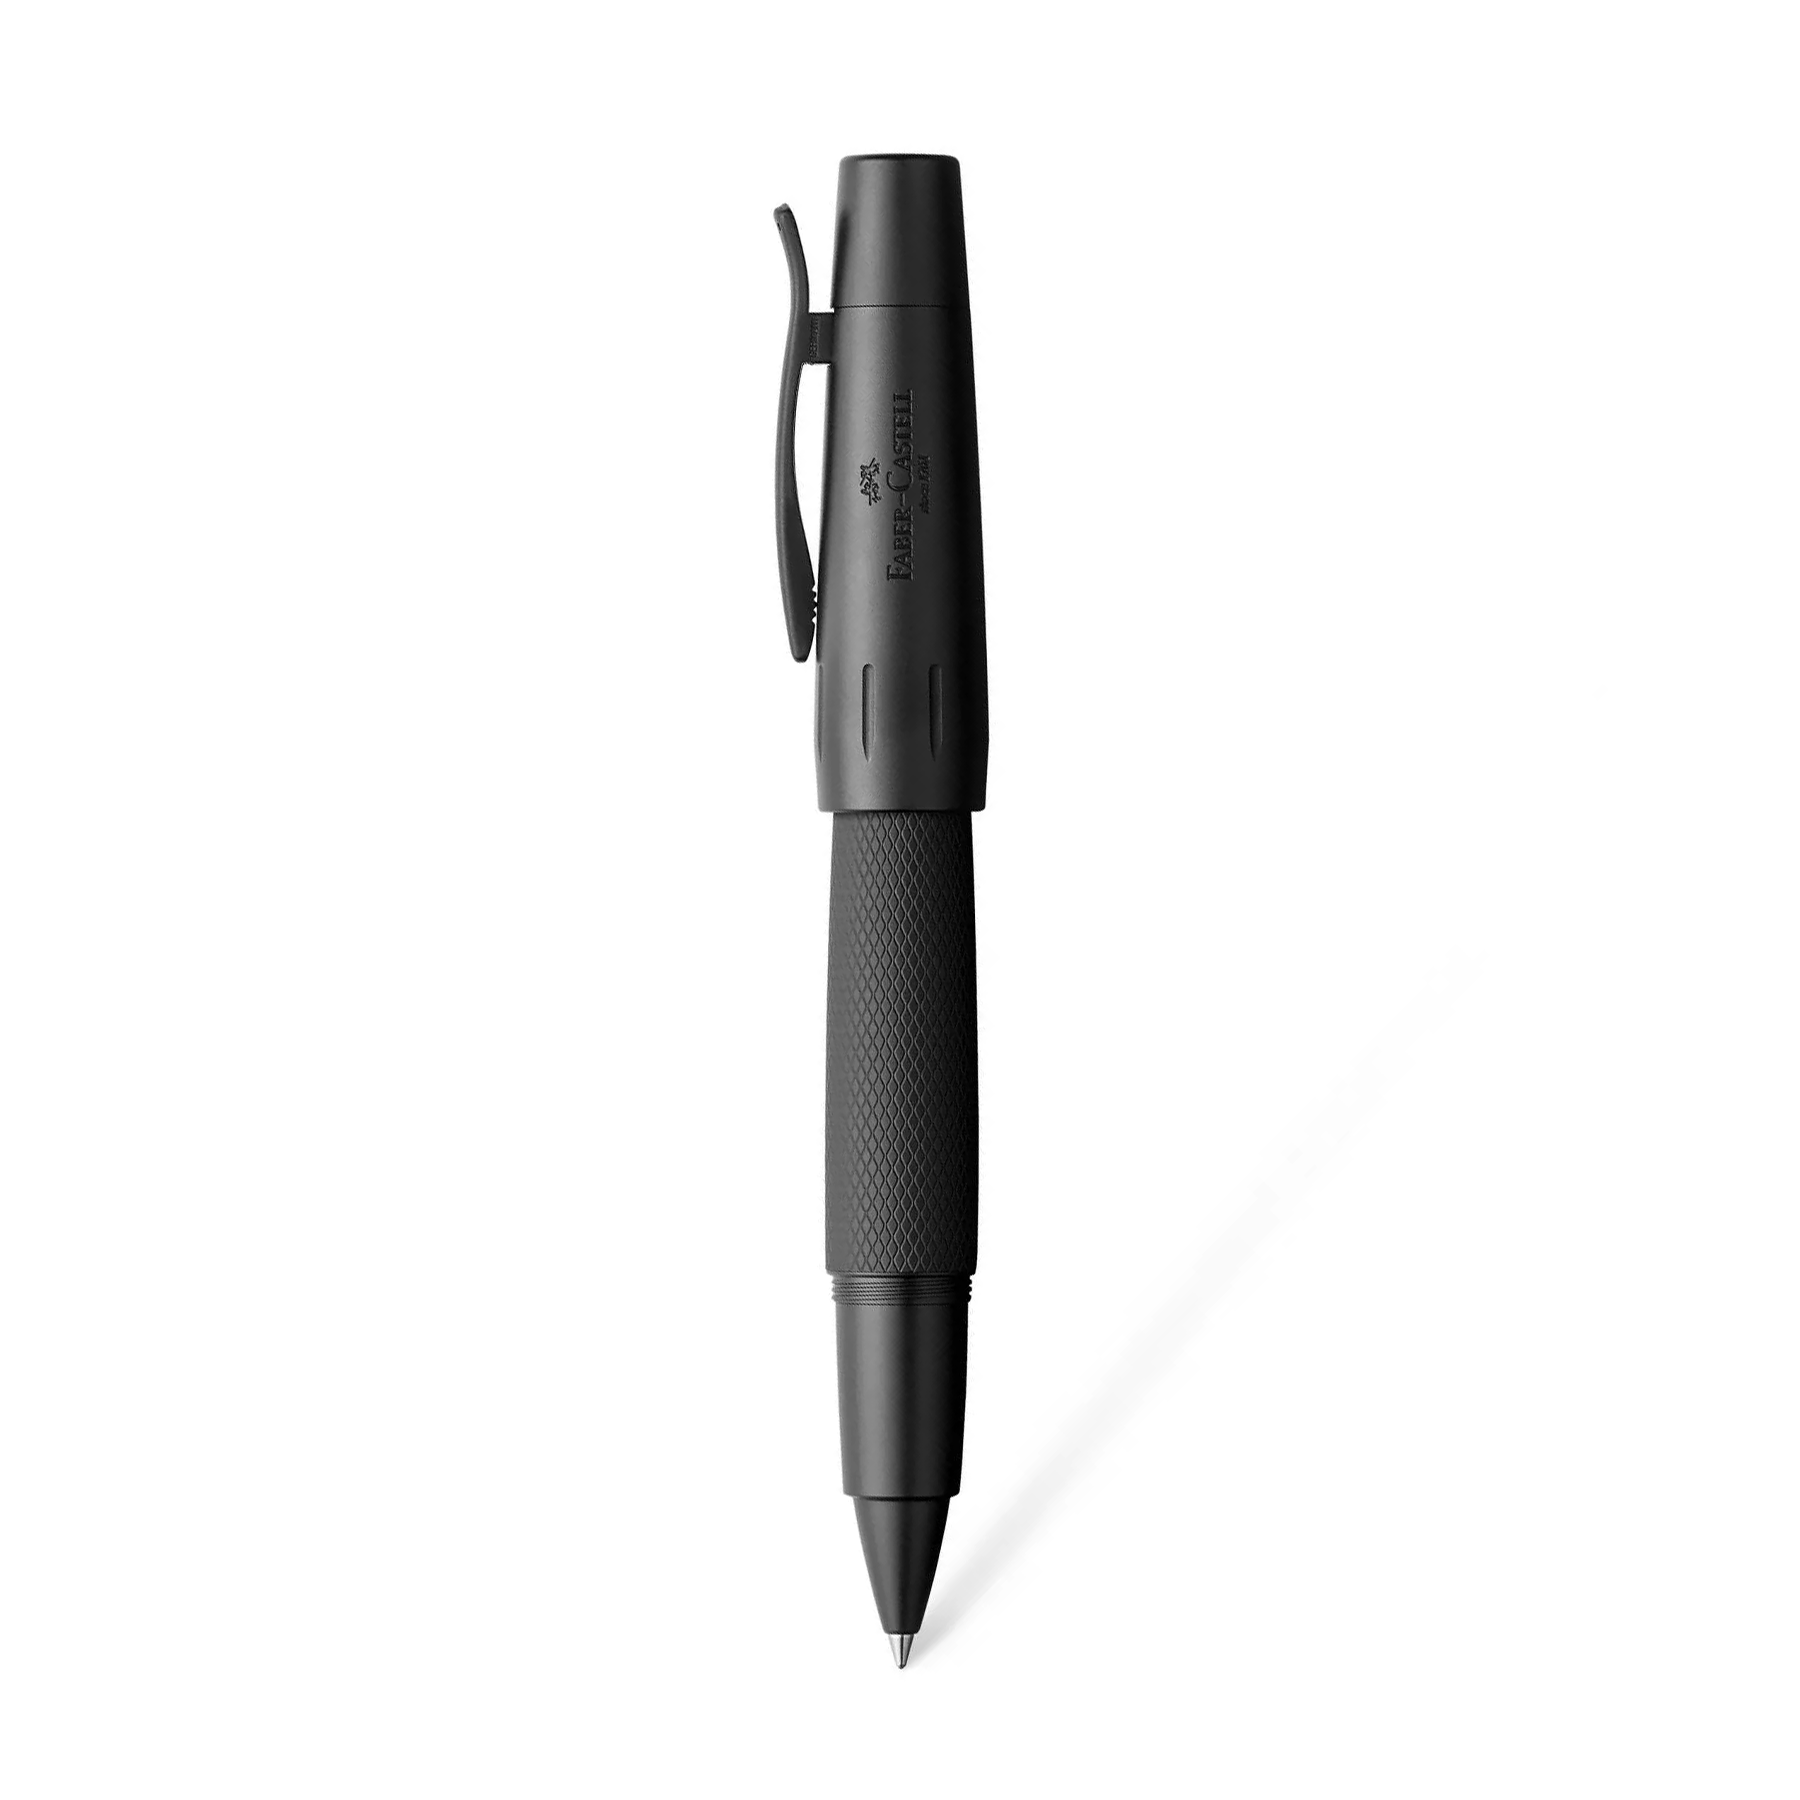 Faber Castell E-Motion Pure Black Rollerball - Pencraft the boutique